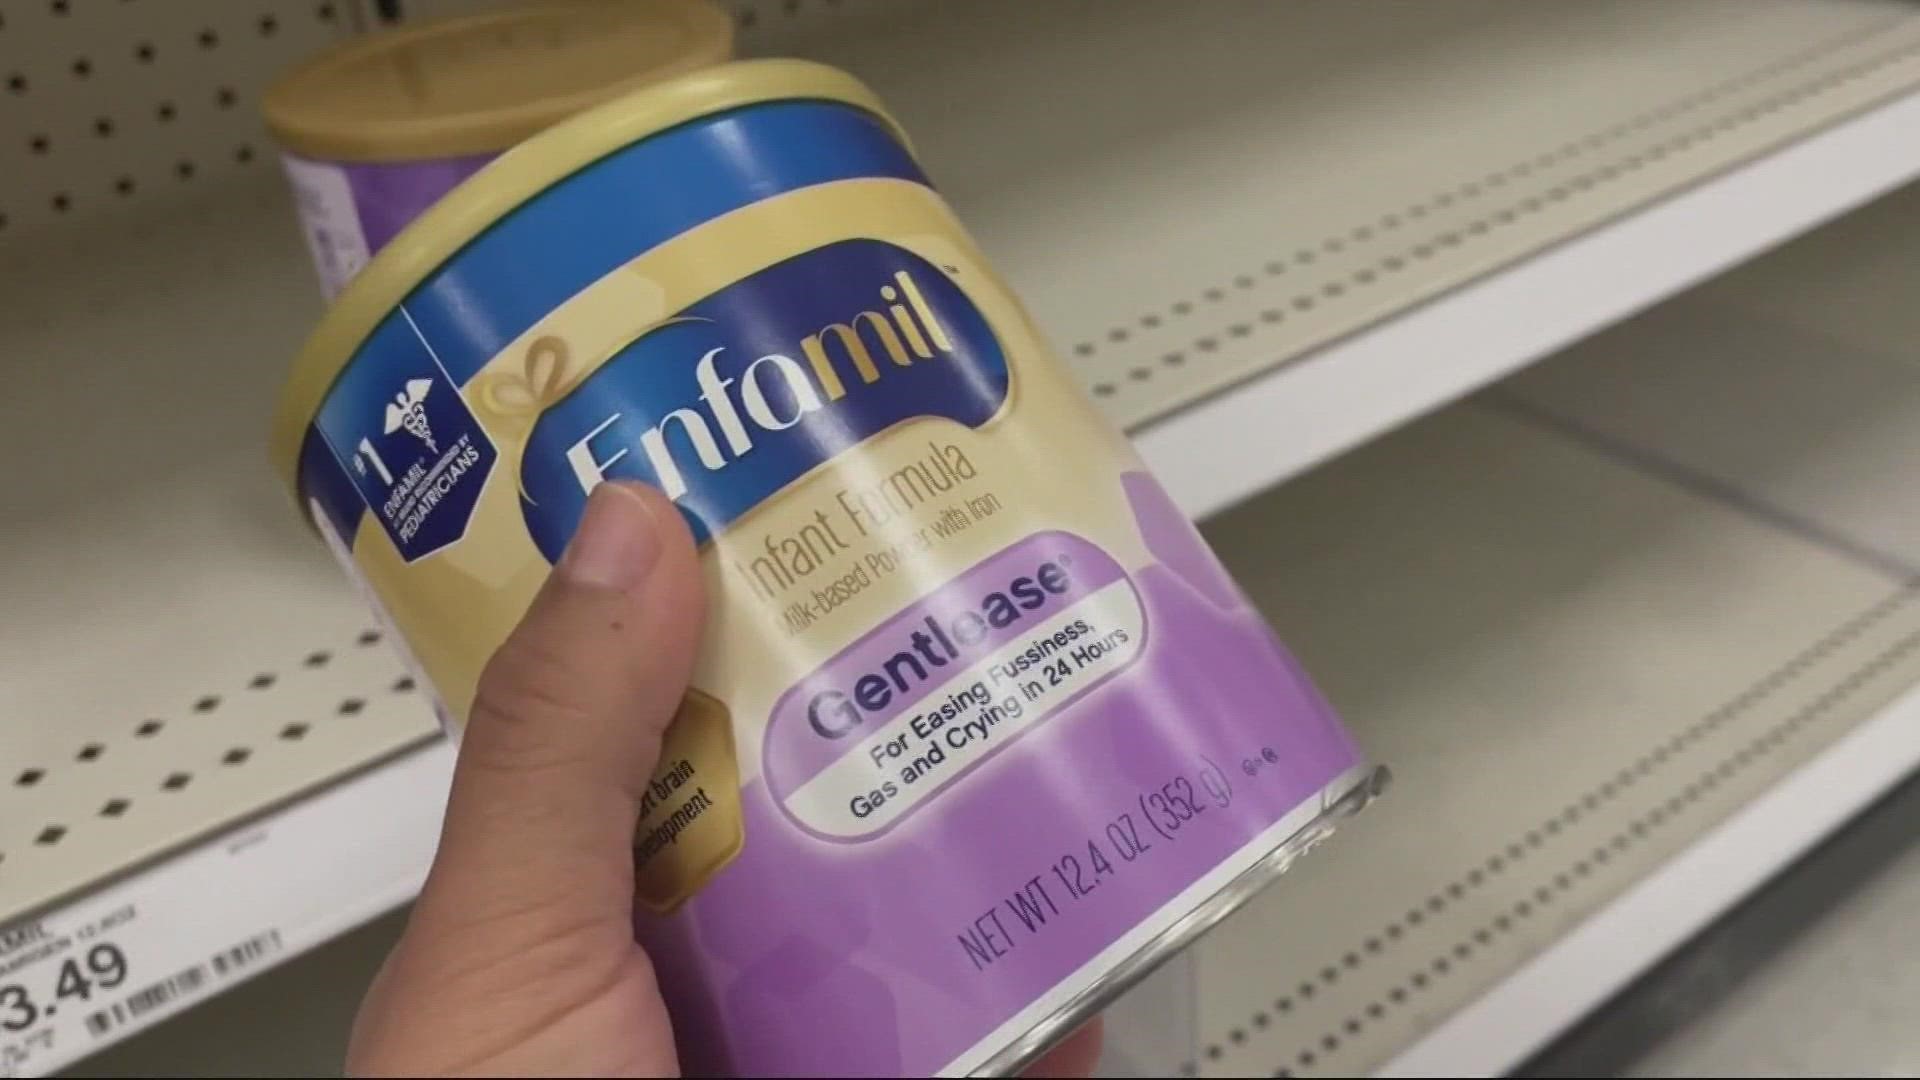 President Biden invoked the Defense Production Act in hopes of refilling store shelves up with baby formula amid the shortage. Devon Haskins explains what it means.